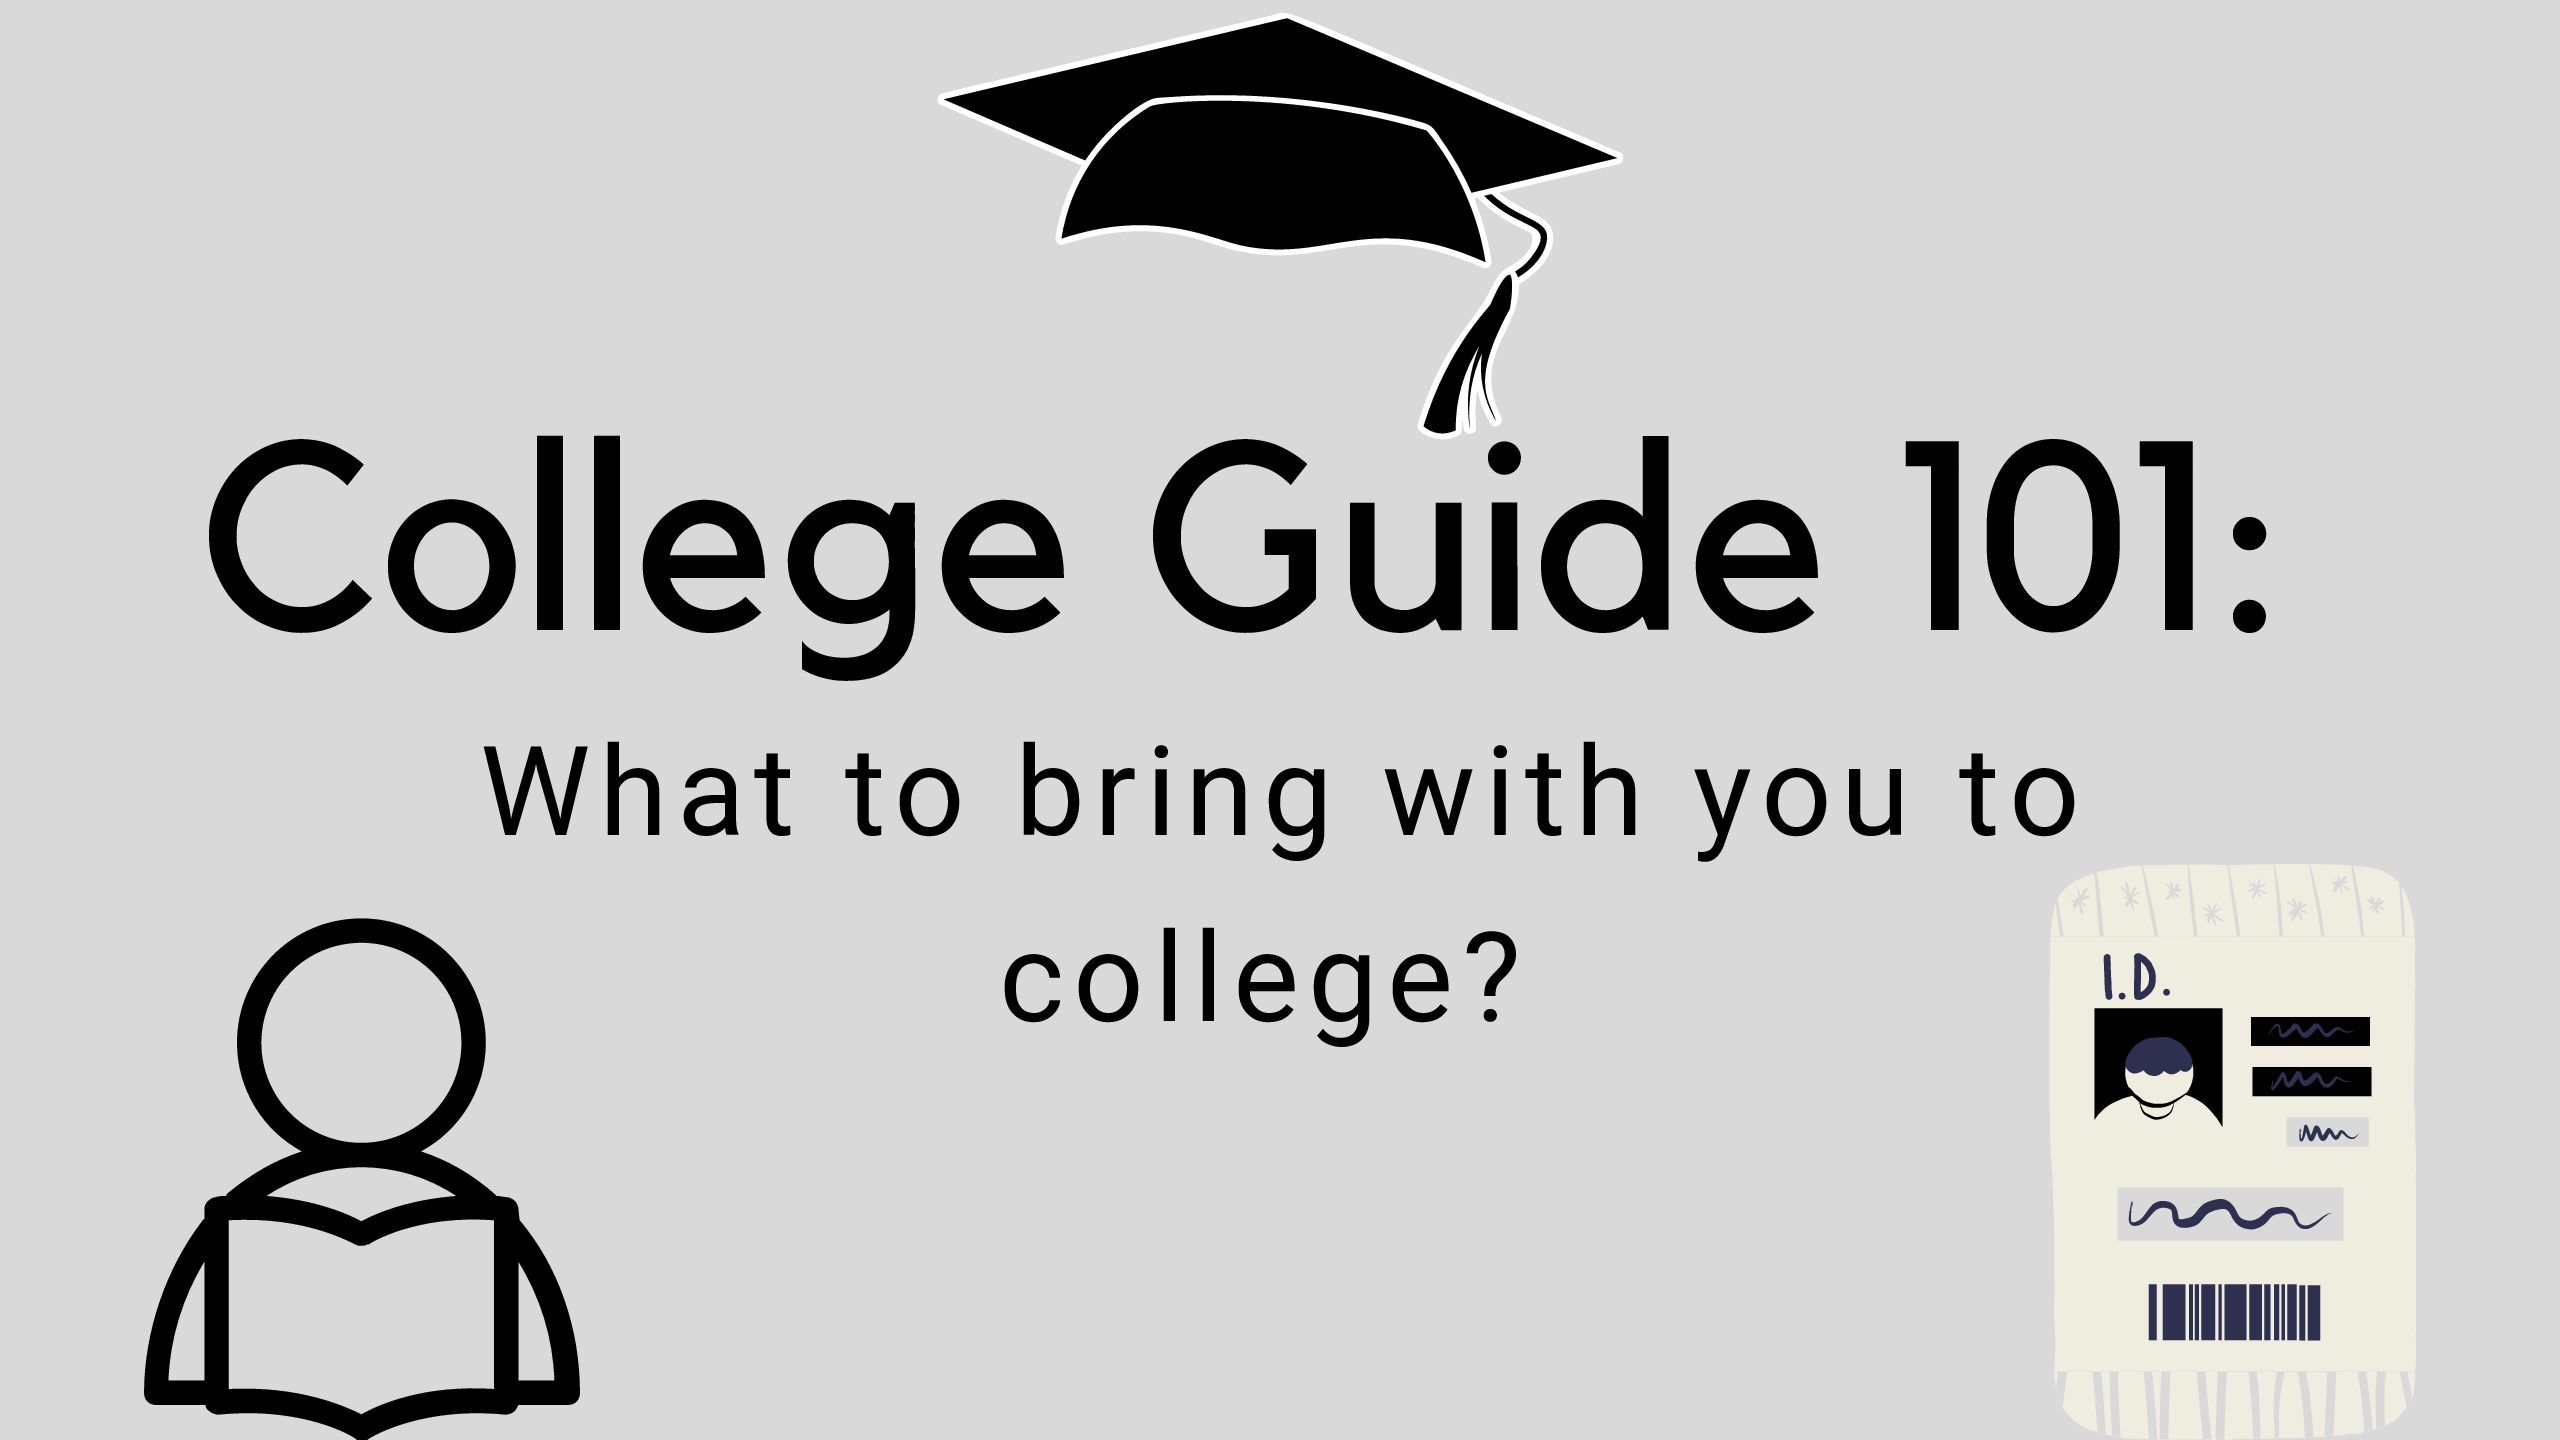 College Guide 101: What to Bring With You to College?